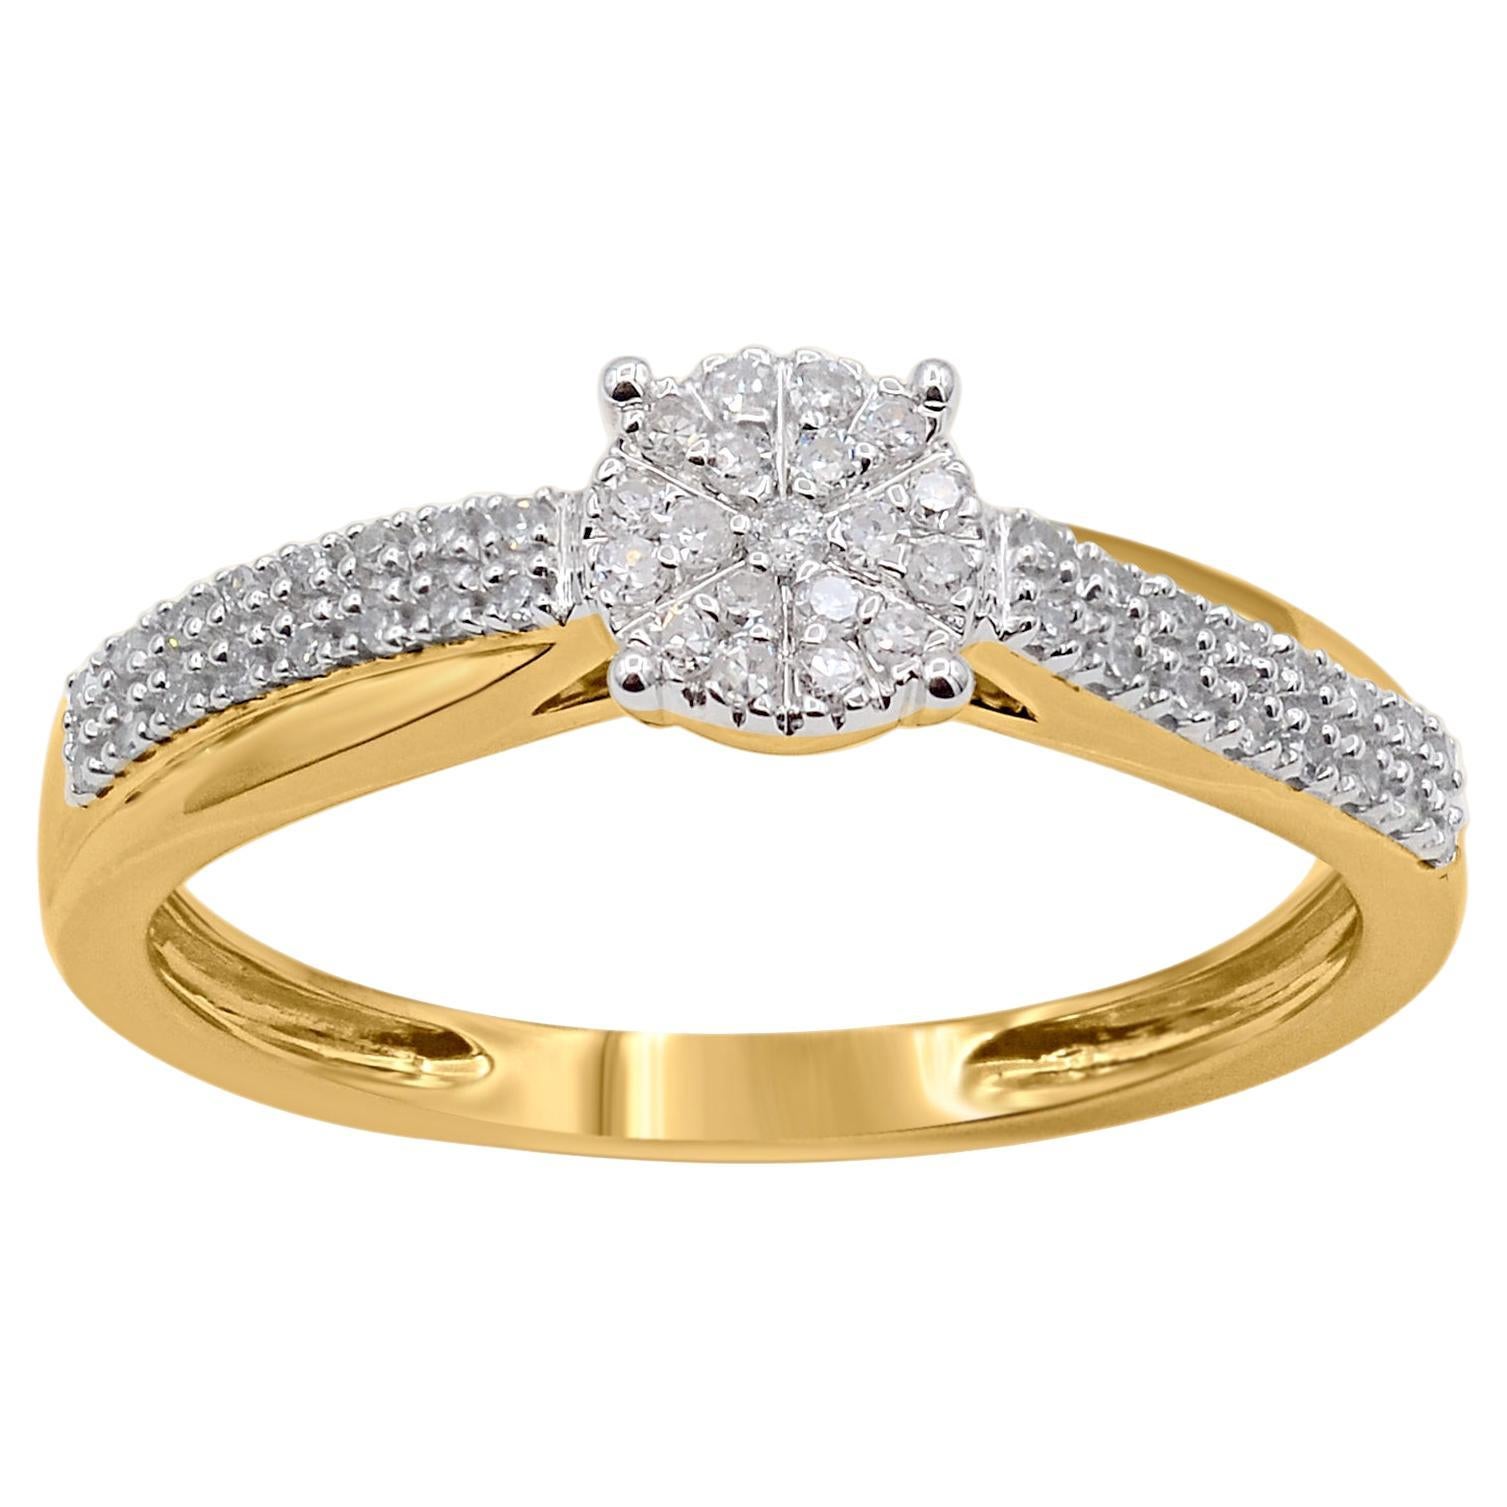 TJD 0.15 Carat Natural Round Diamond Engagement Ring in 18KT Yellow Gold